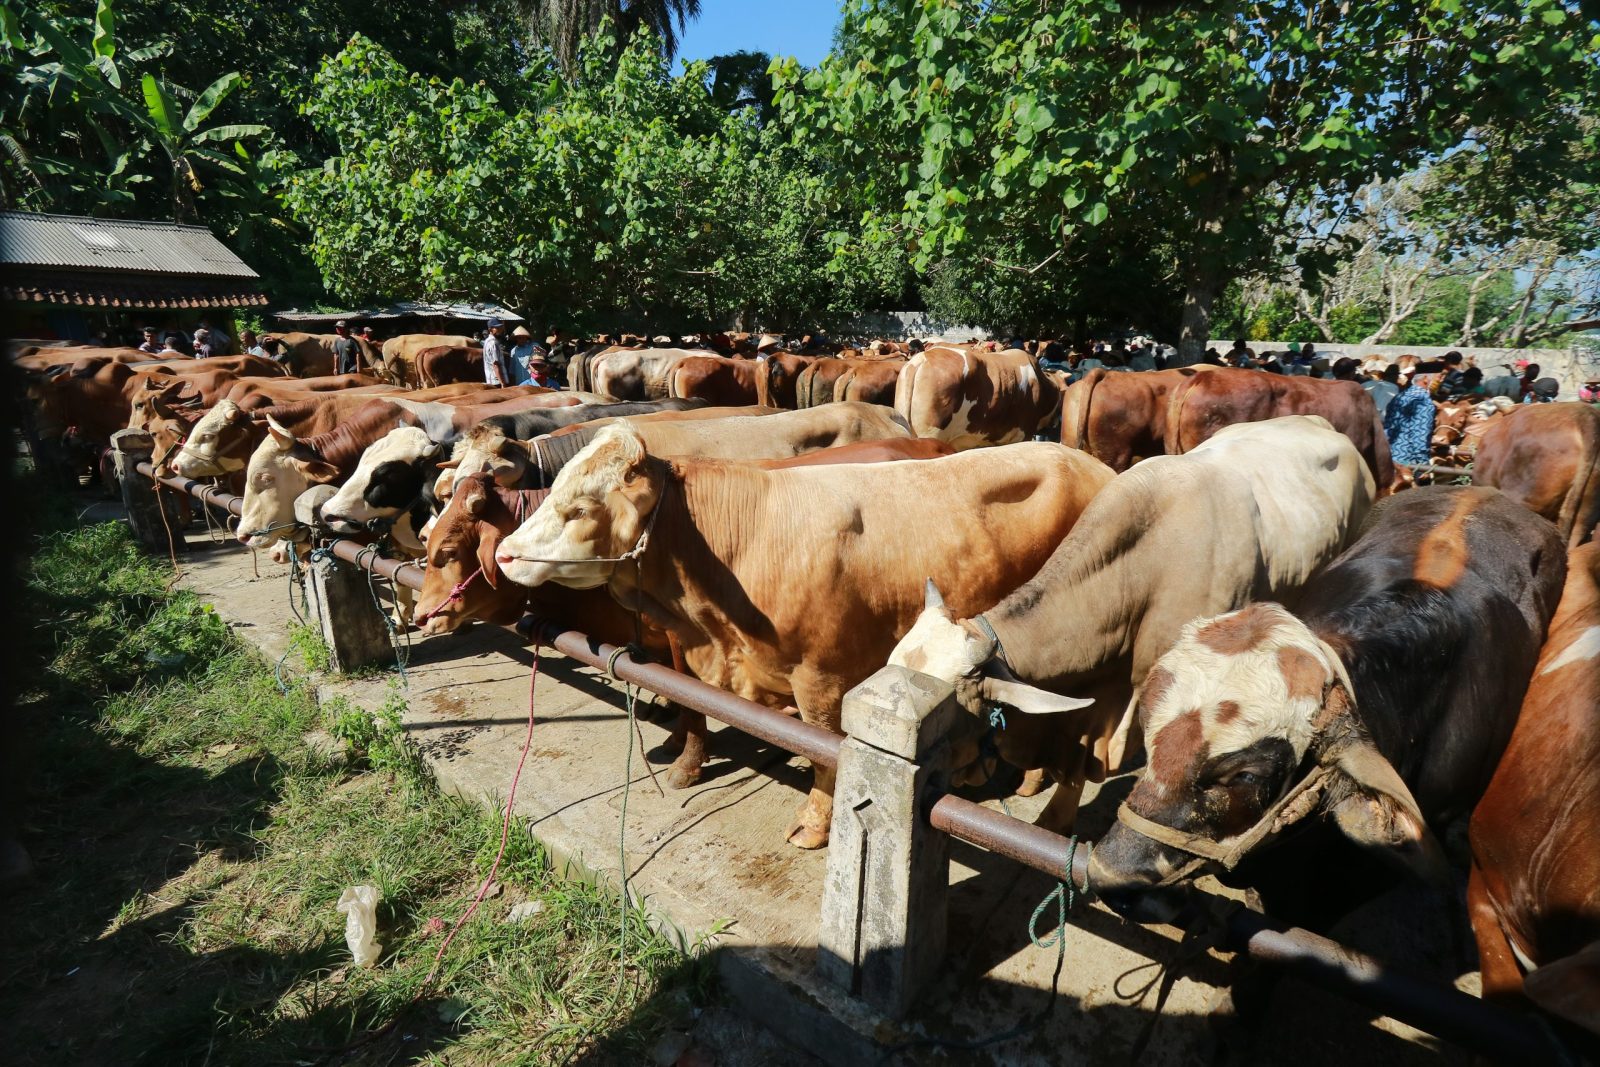 White and brown cows at an animal market